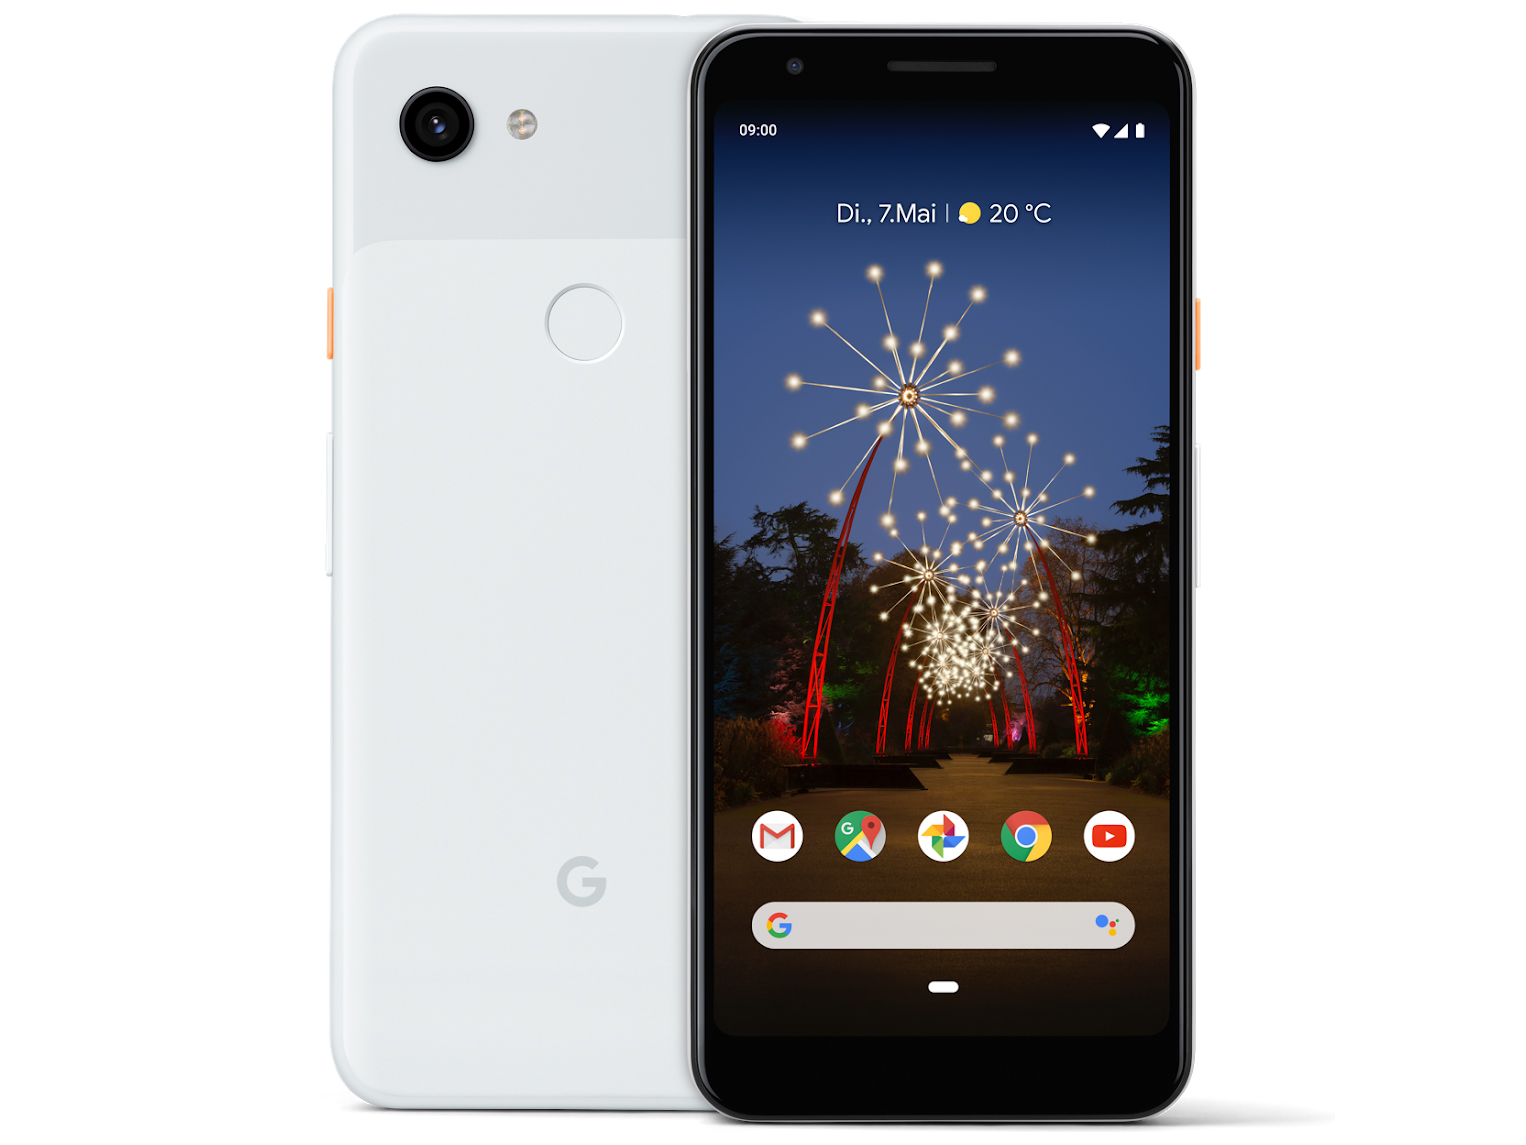 The Pixel 8 Pro heralds the death of curved-screen smartphones